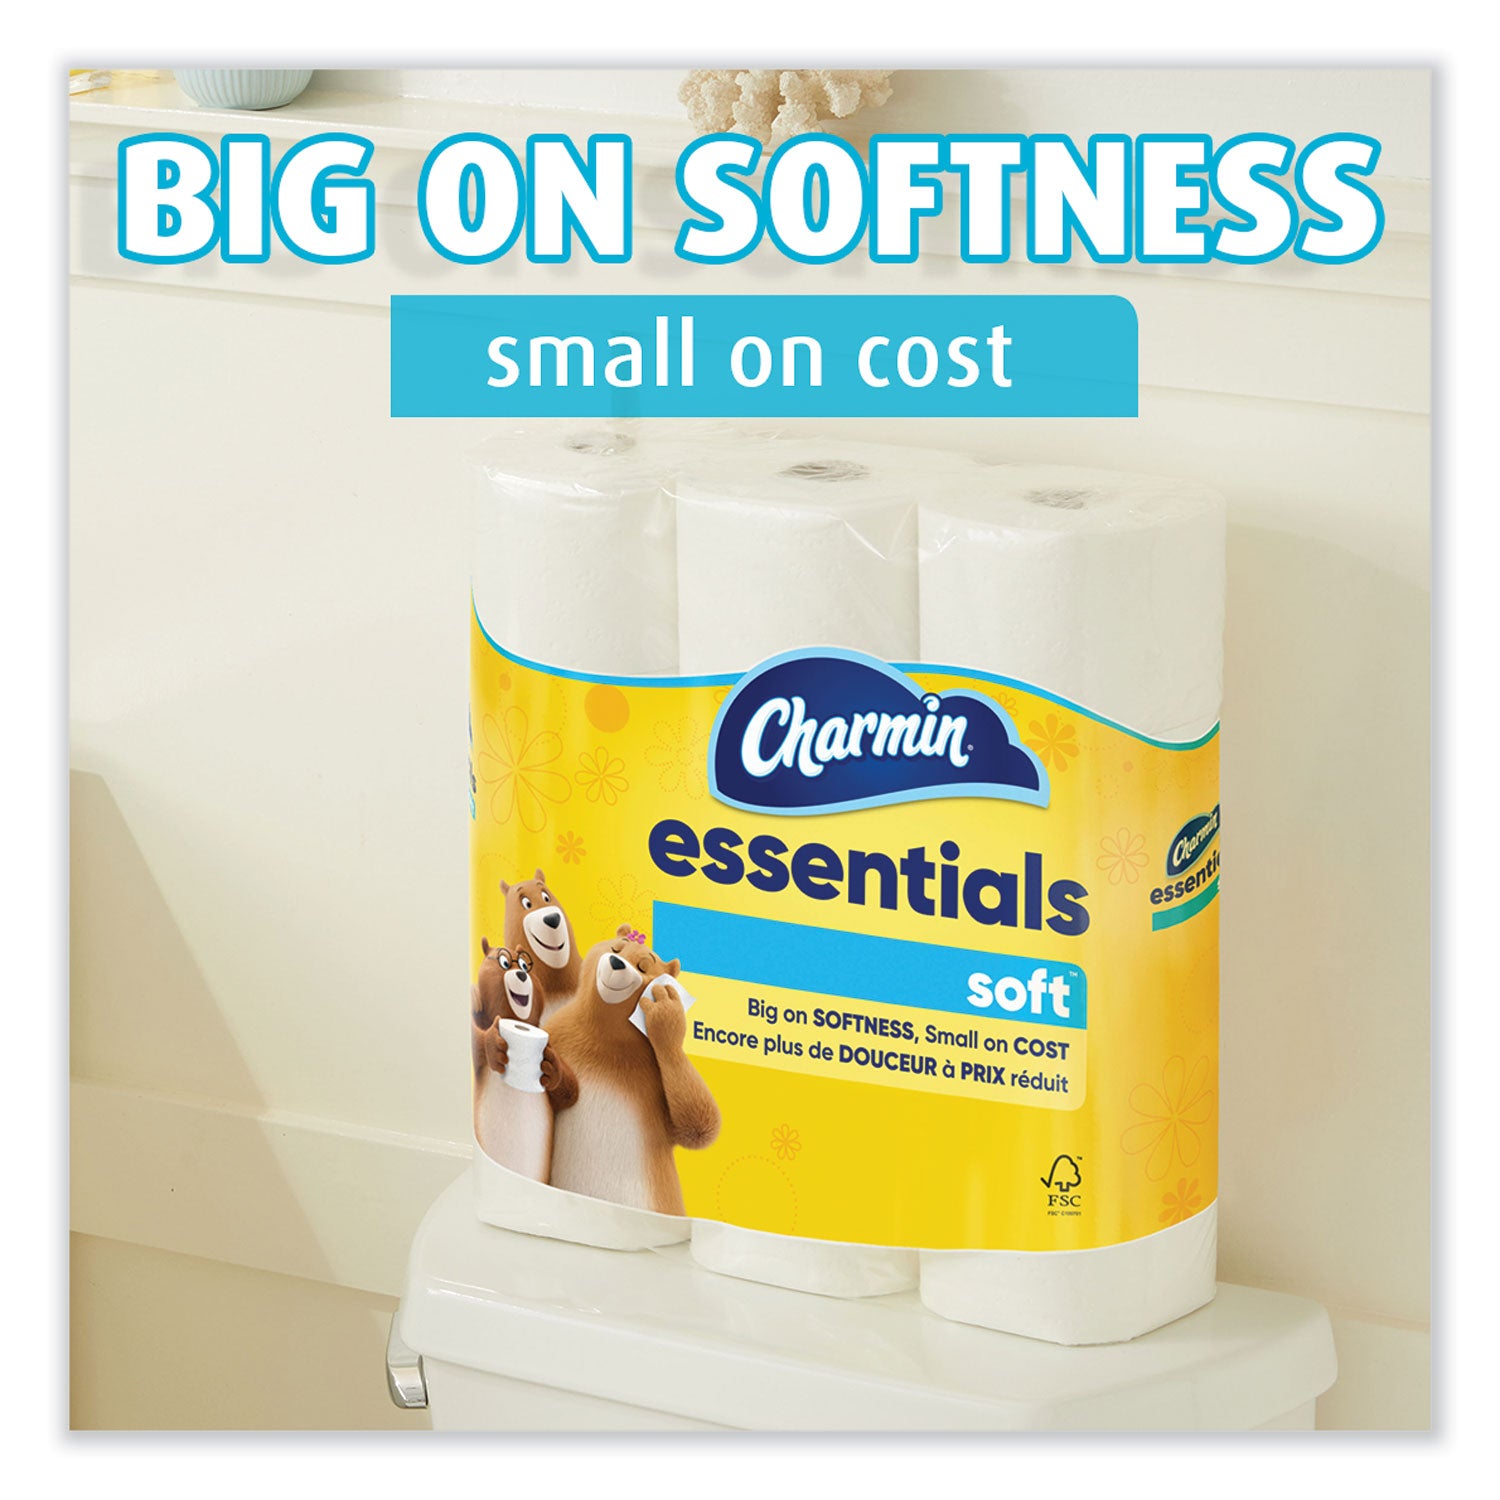 essentials-soft-bathroom-tissue-septic-safe-2-ply-white-352-sheets-roll-30-rolls-carton_pgc67355 - 5